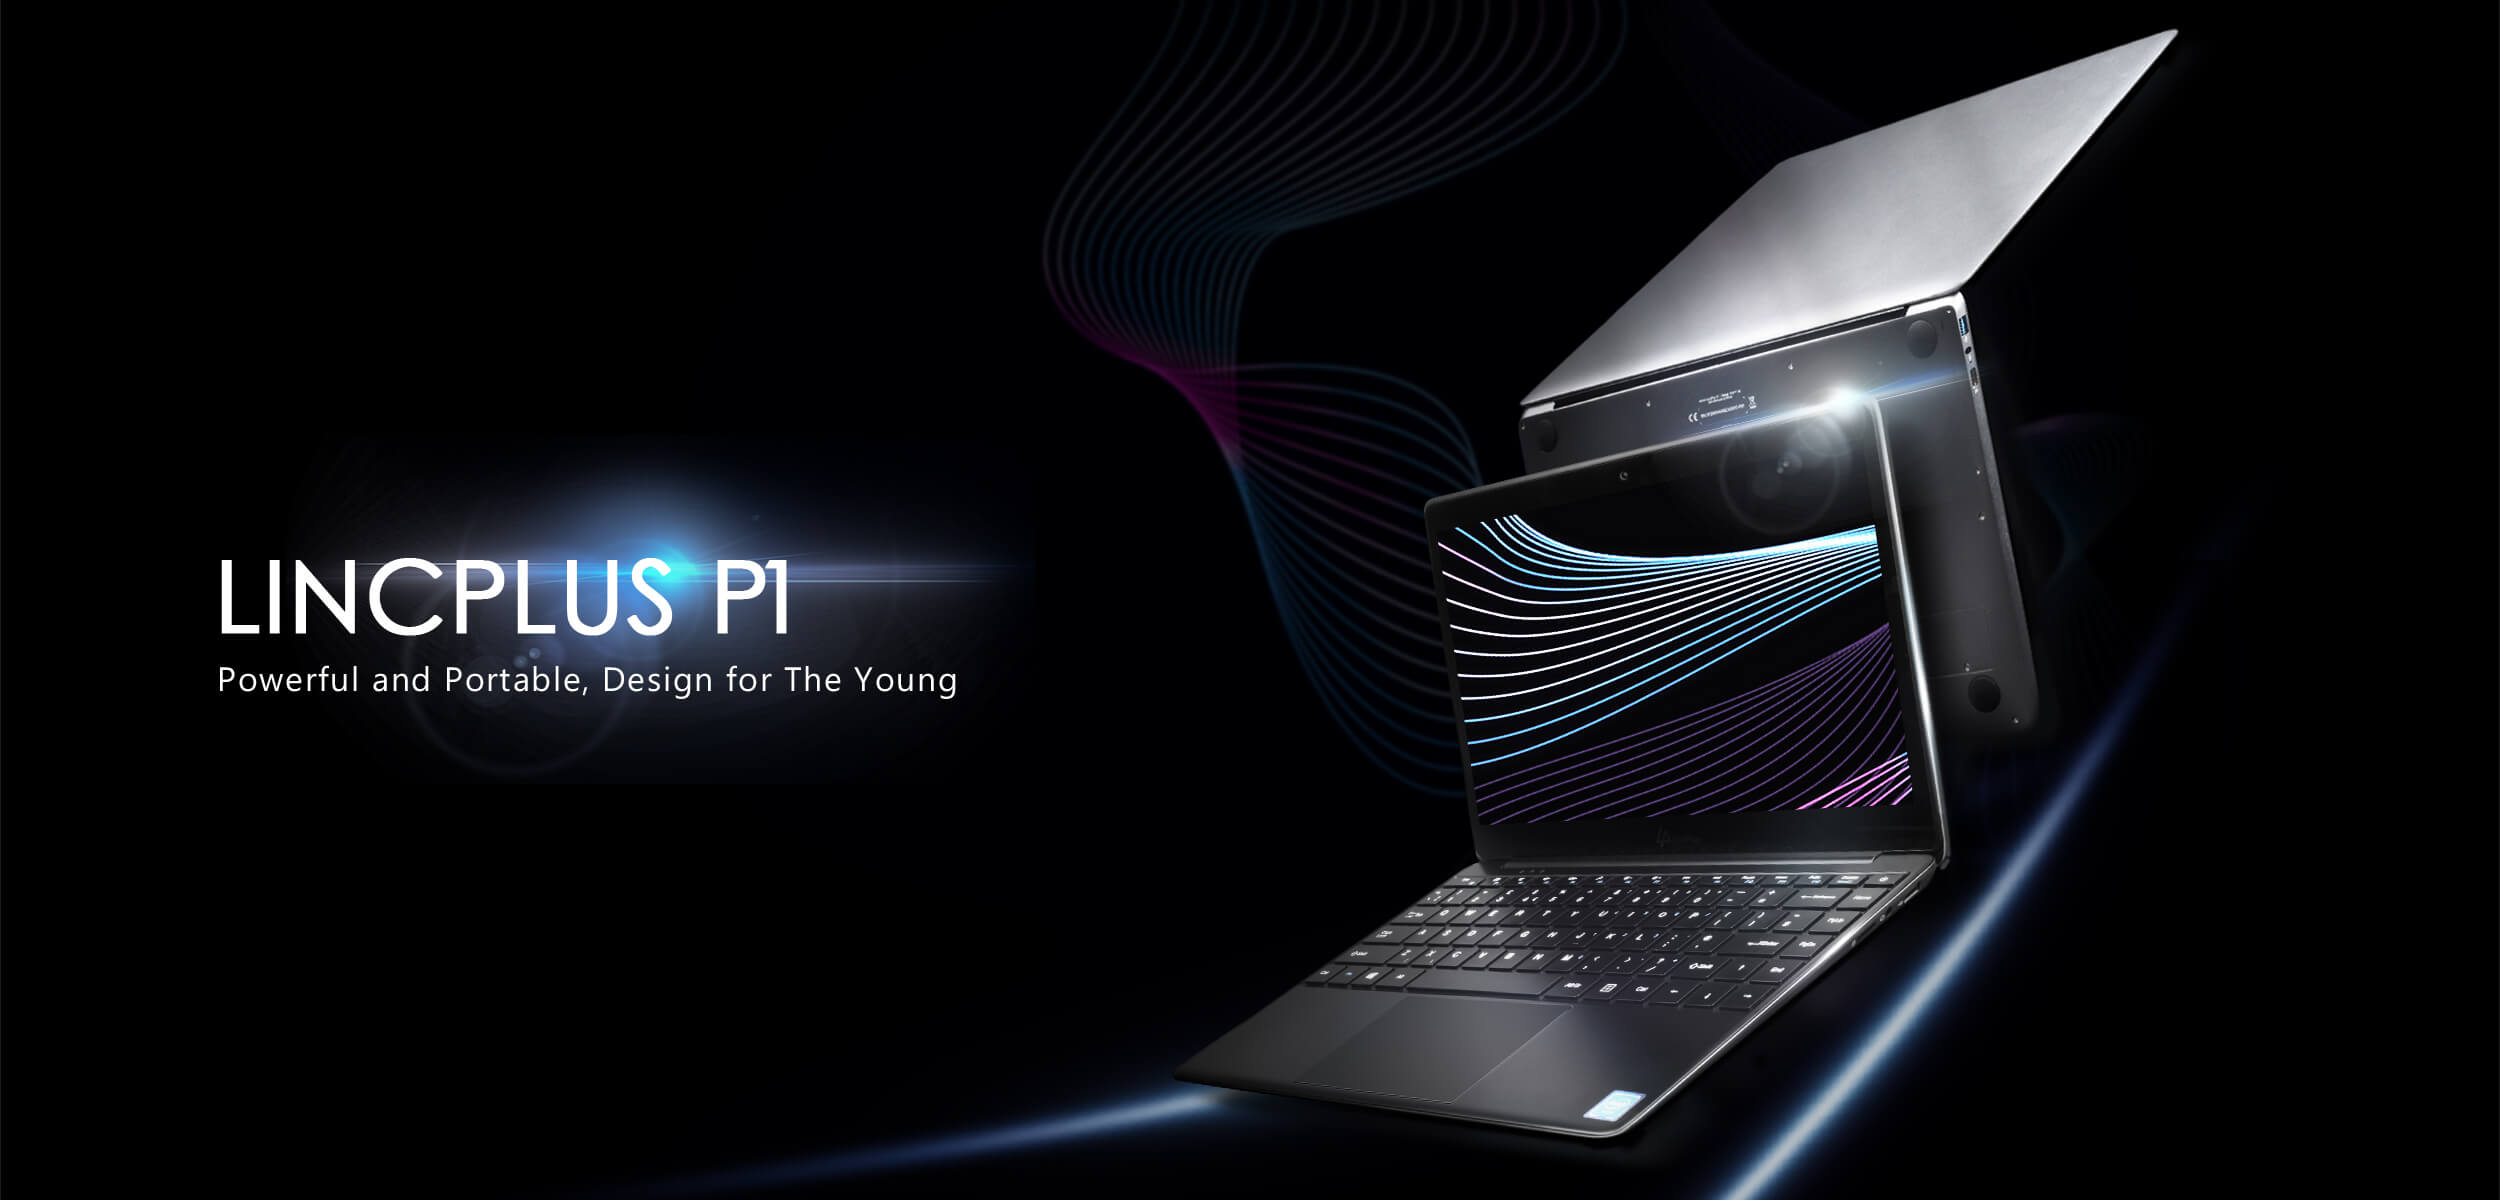 lincplus p1 laptop - affordable laptop designed for the young -banner